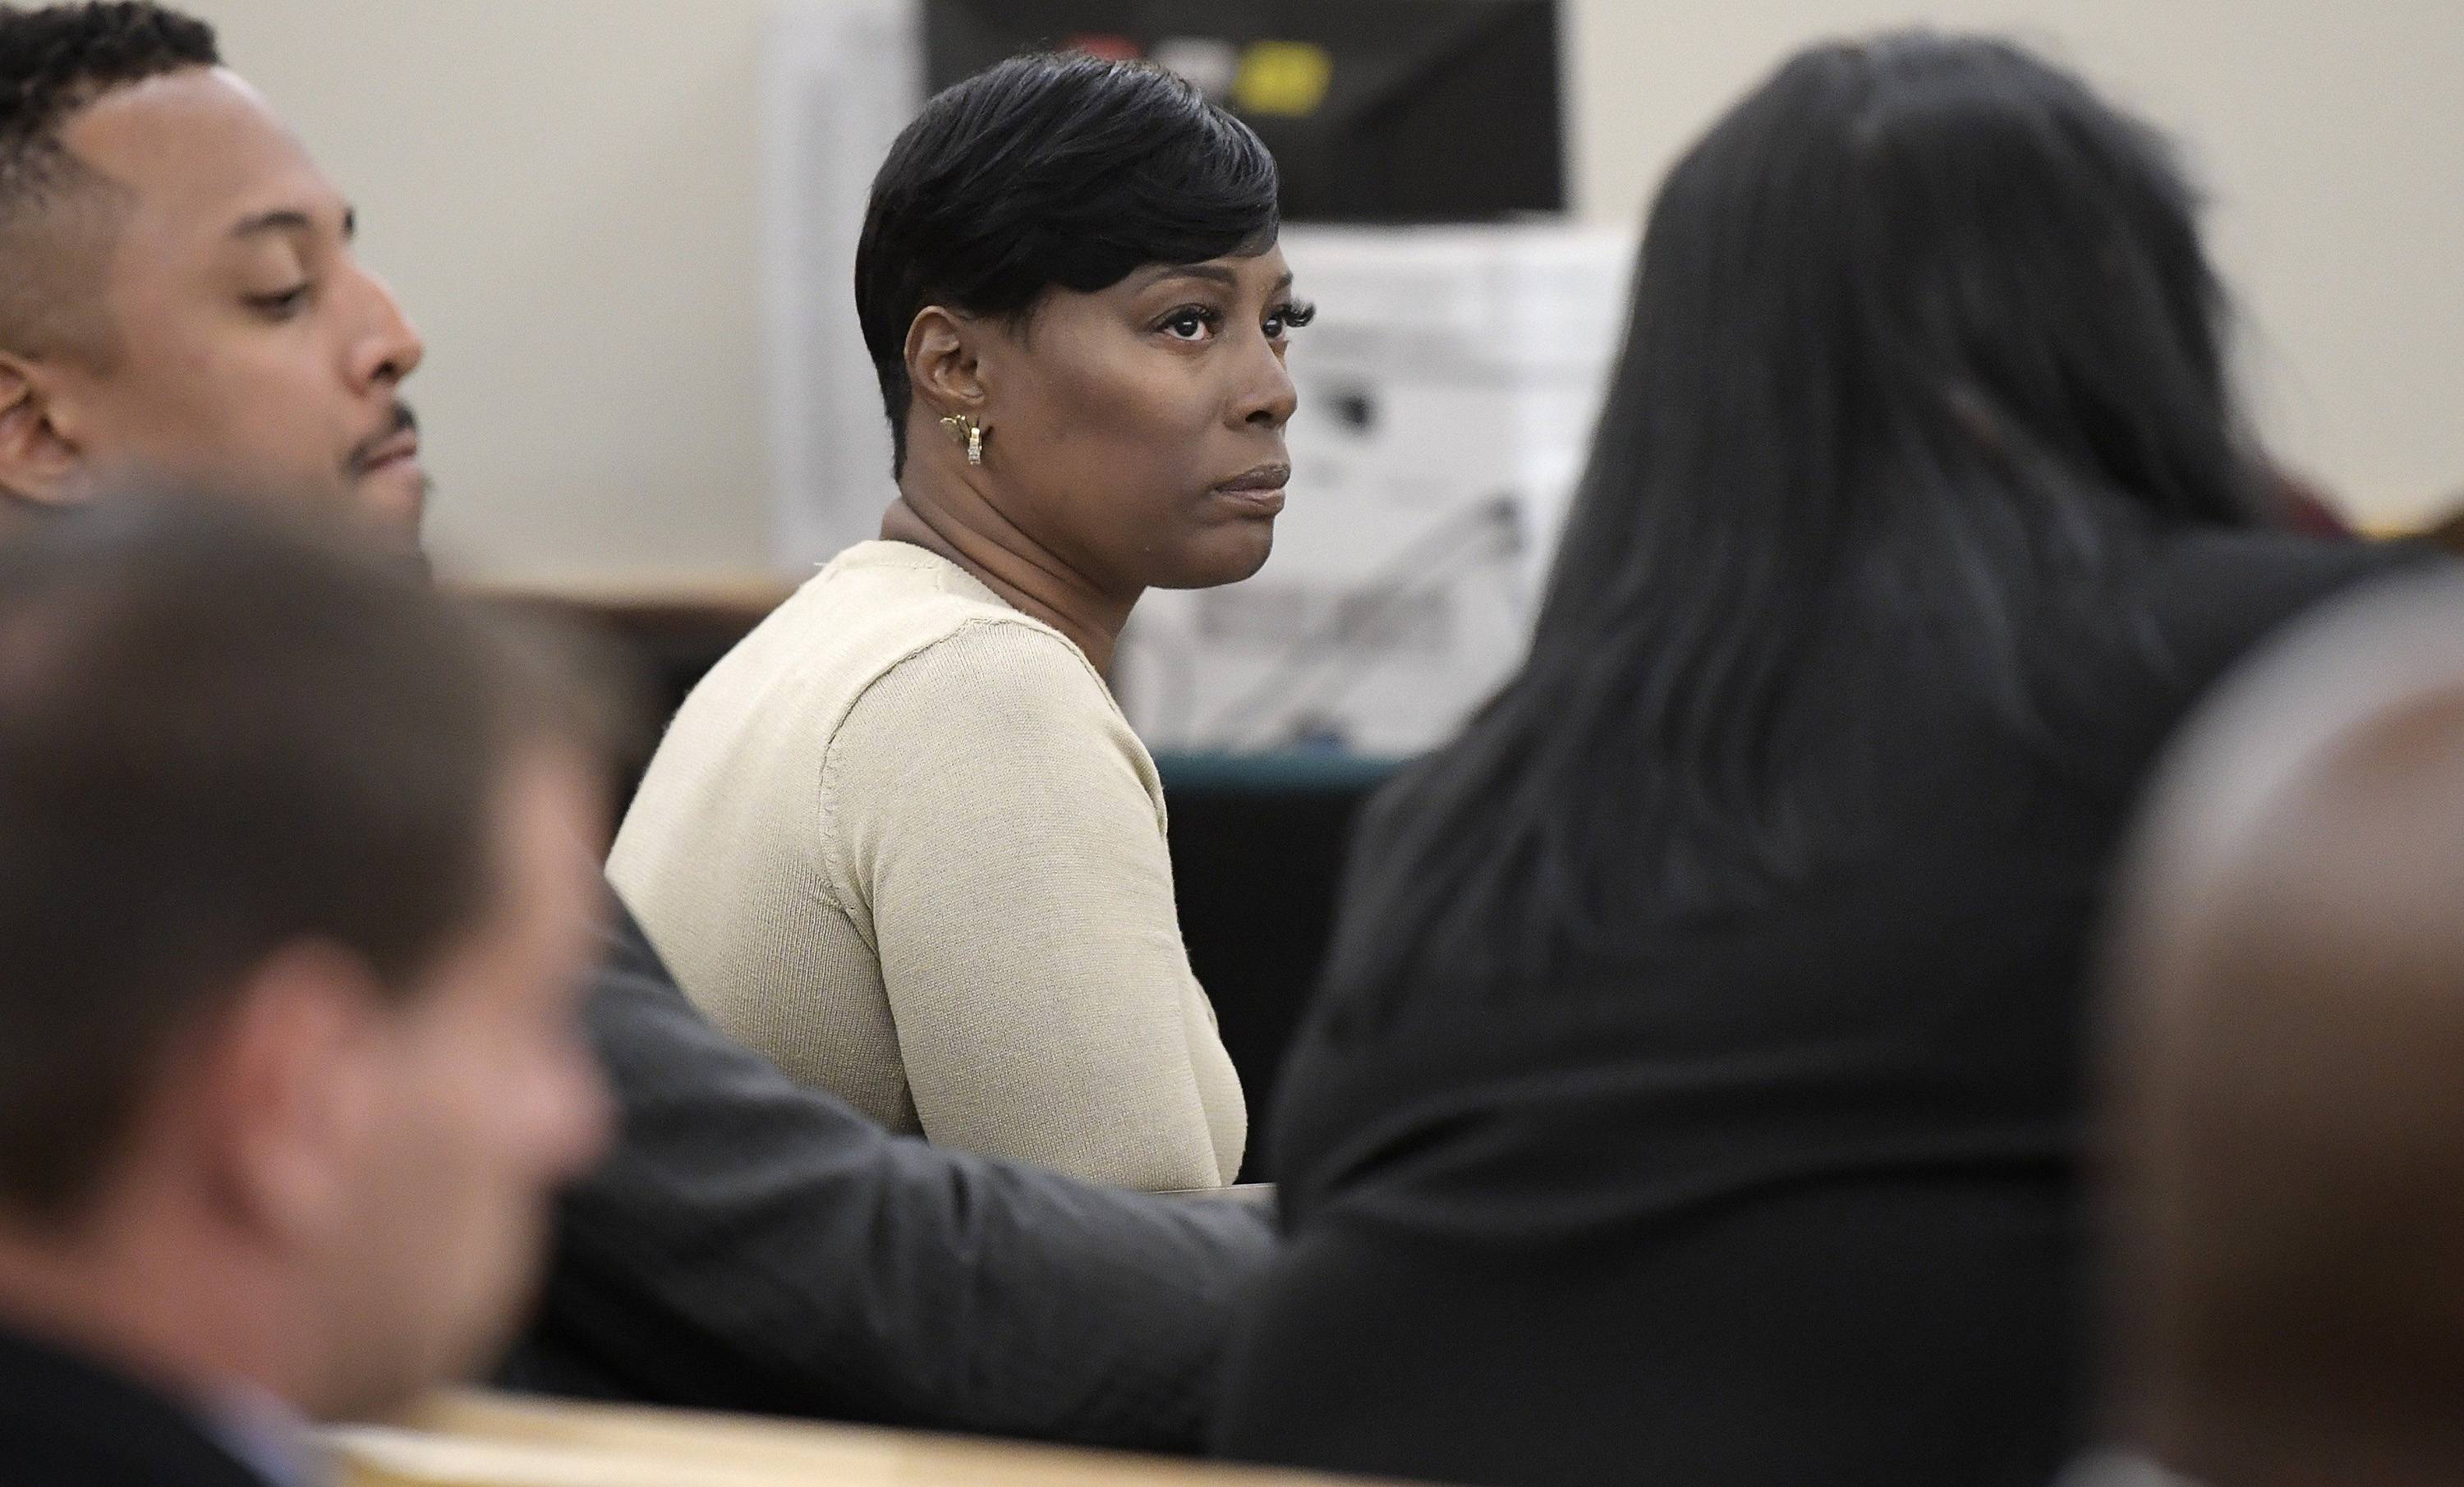 Crystal Mason, middle, convicted for illegal voting and sentenced to five years in prison, sitting at the defense table in Ruben Gonzalez's court at Tim Curry Justice Center in Fort Worth, Texas, on May 25, 2018. (Max Faulkner/Fort Worth Star-Telegram/TNS)